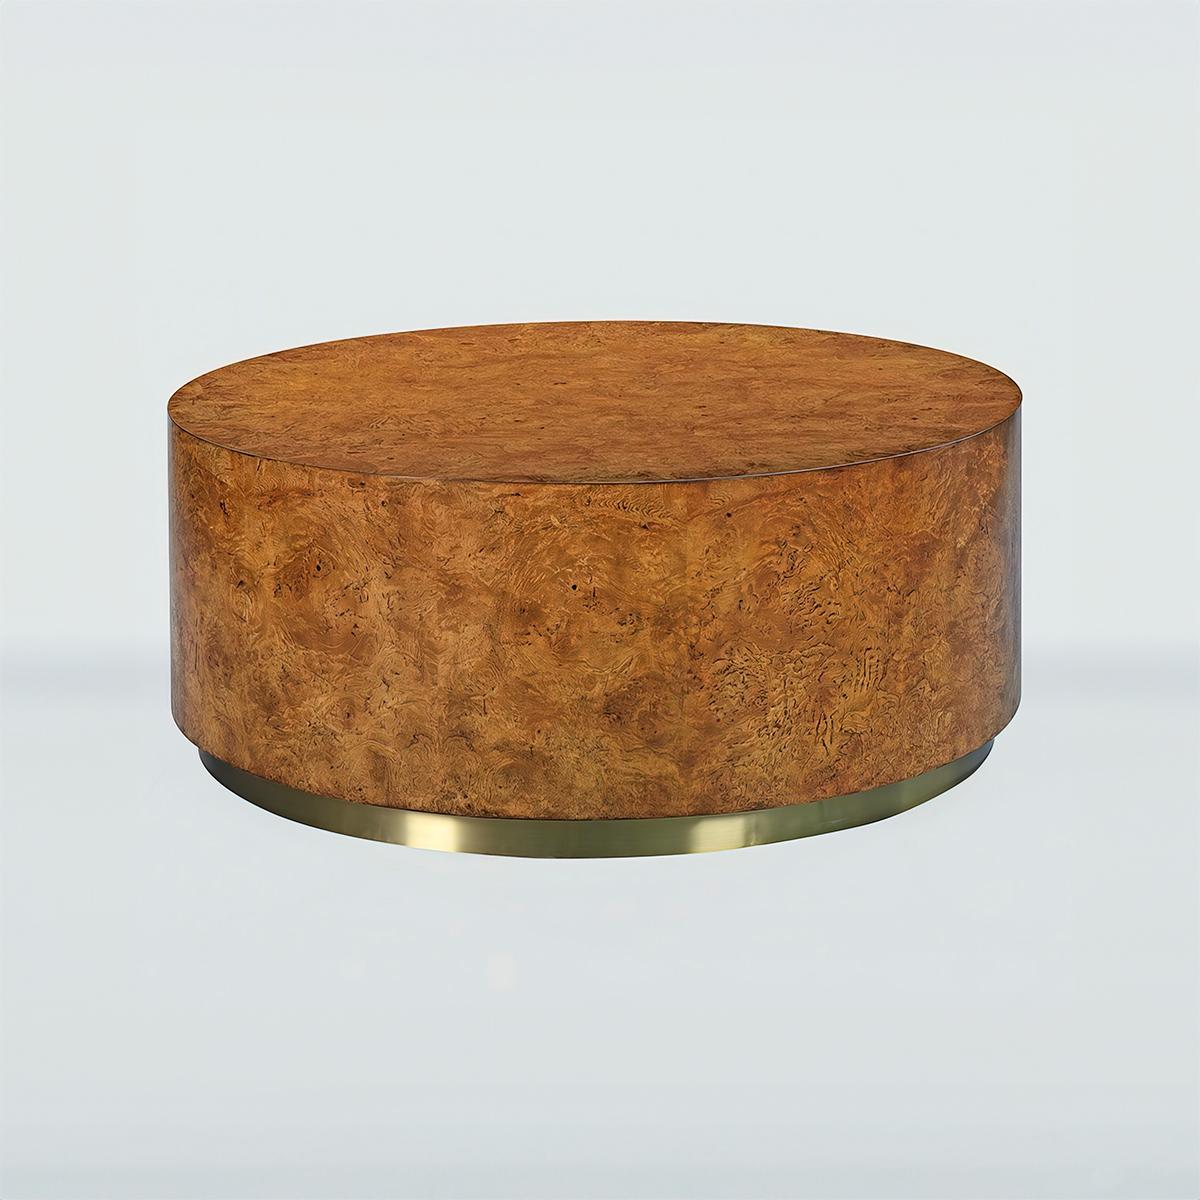 Modern Burl Round Coffee Table, a unique midcentury inspired cylindrical coffee table wrapped in burl wood veneers and raised on a brass metal base.

Dimensions: 38